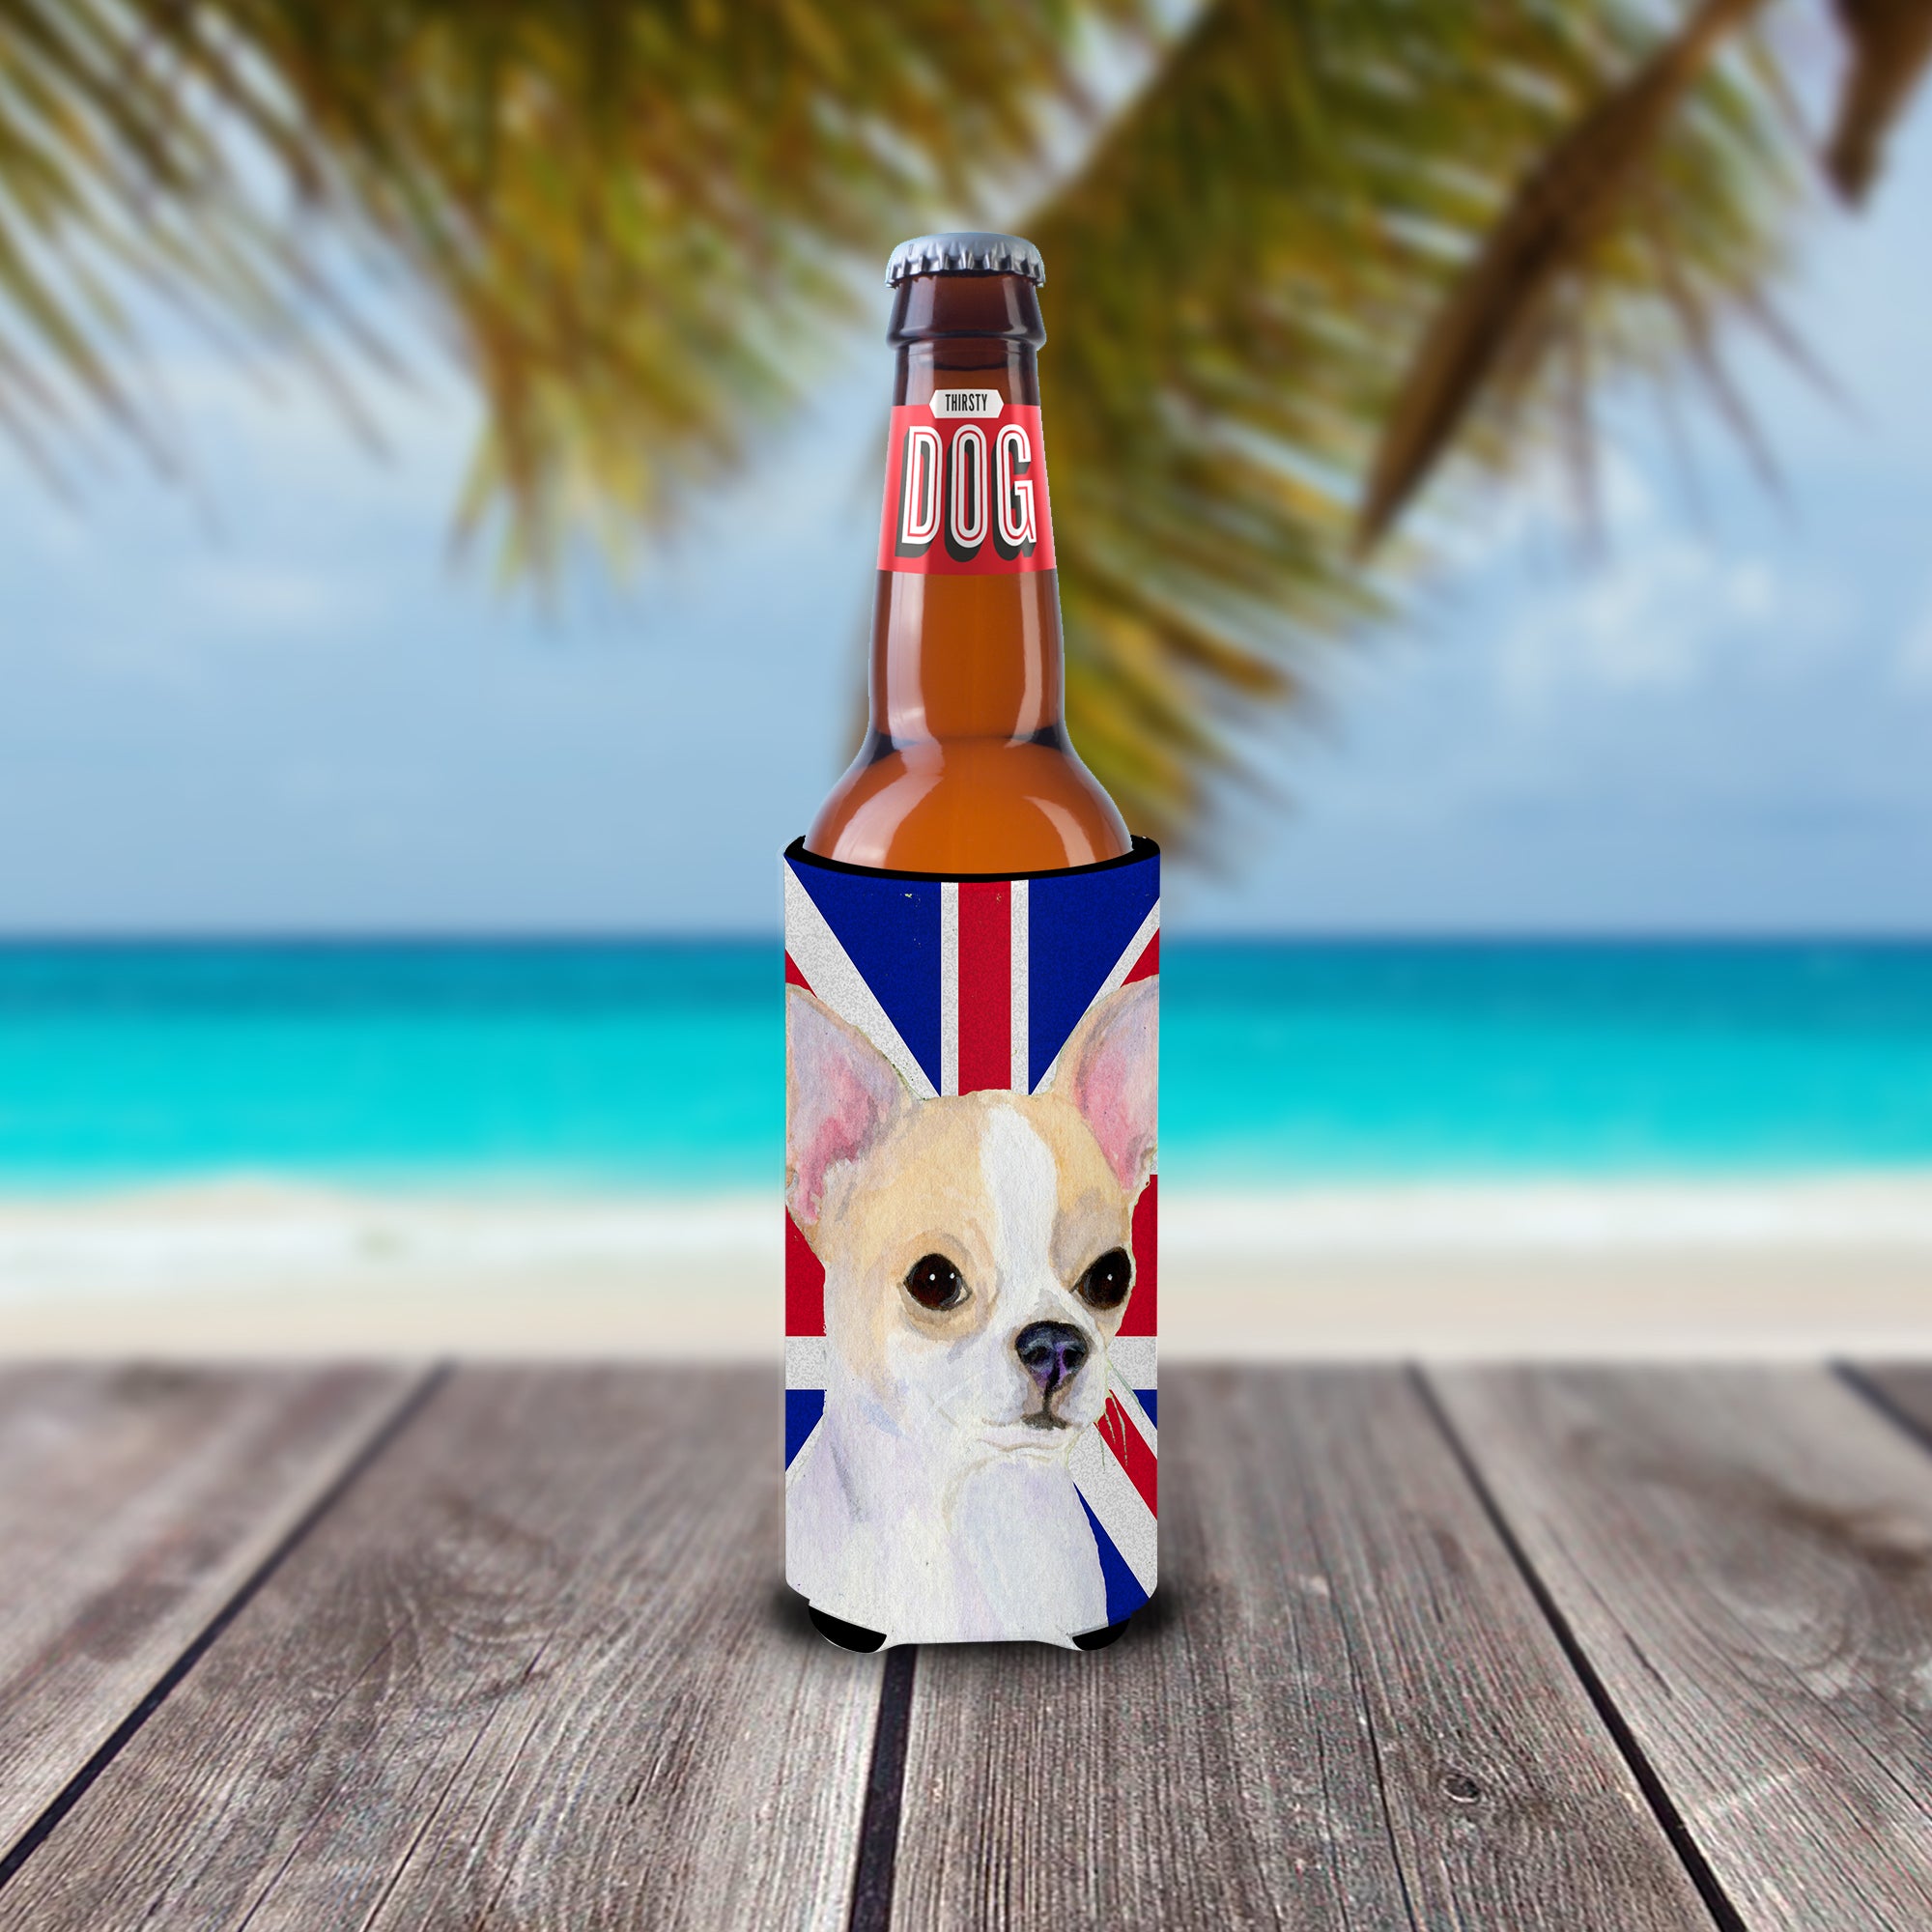 Chihuahua with English Union Jack British Flag Ultra Beverage Insulators for slim cans SS4916MUK